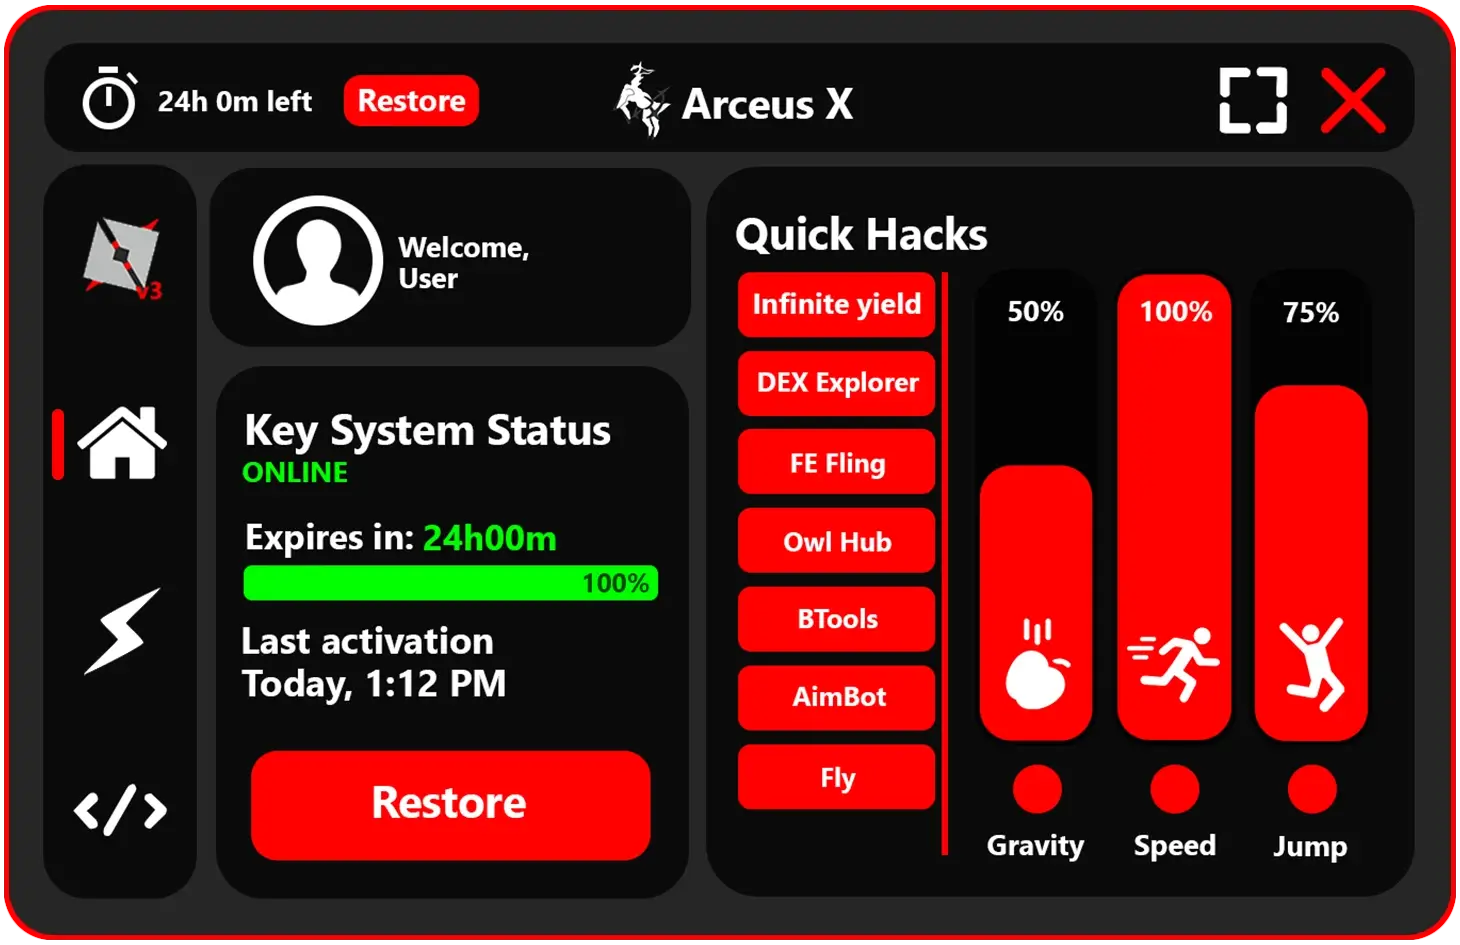 Arceus X Neo V1.0.6 (OFFICIAL) - Download #1 Roblox Mod Menu in